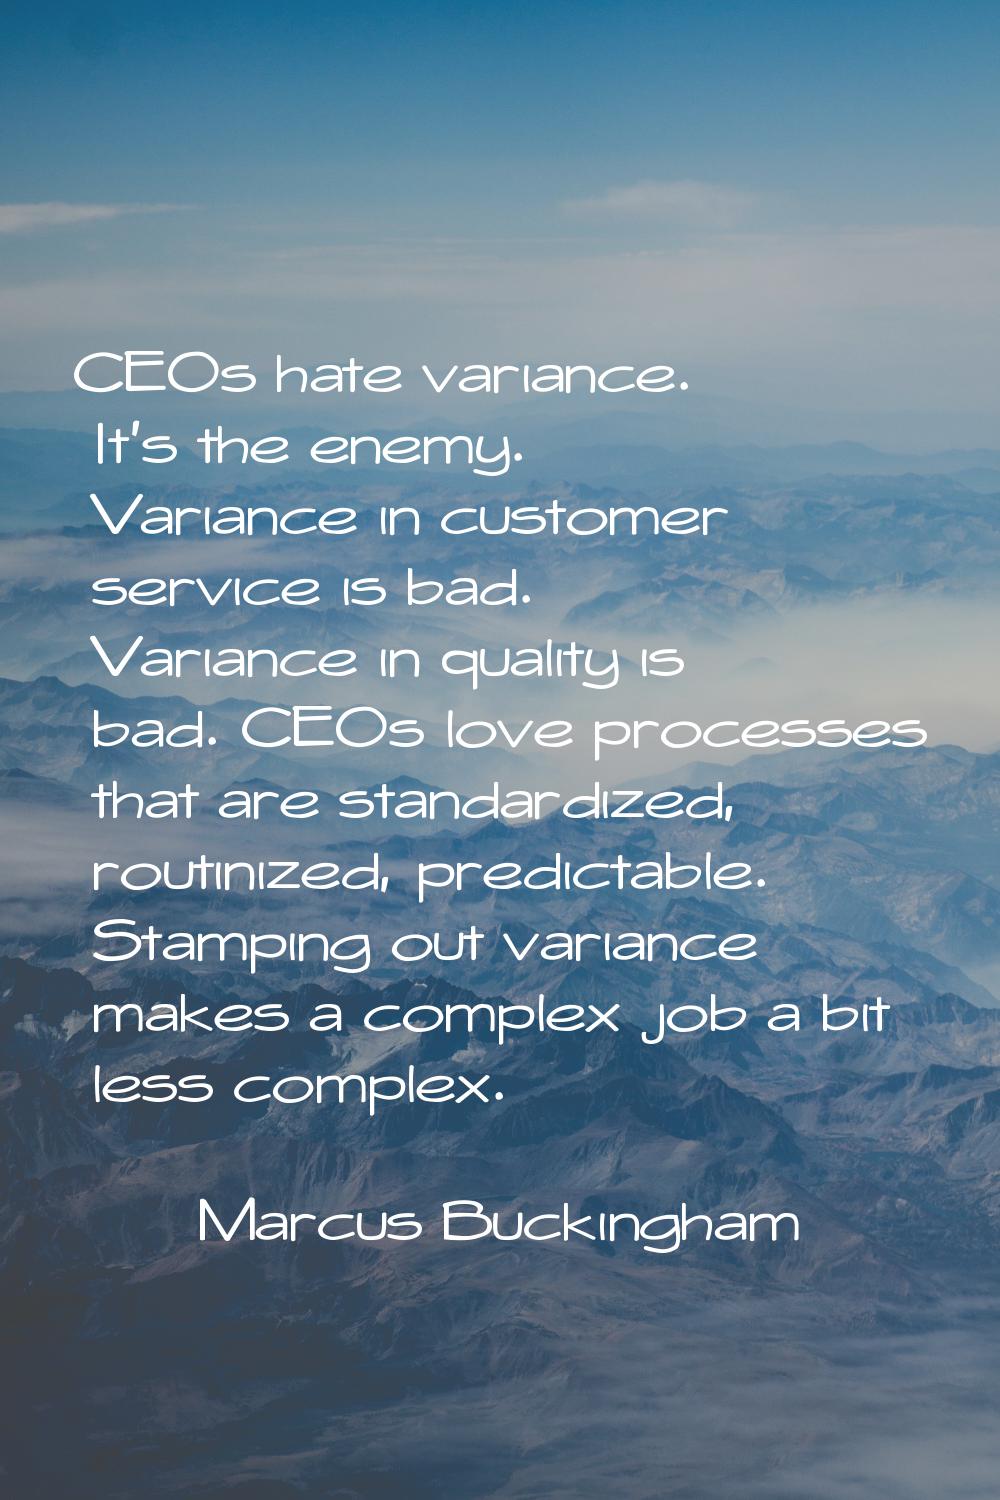 CEOs hate variance. It's the enemy. Variance in customer service is bad. Variance in quality is bad